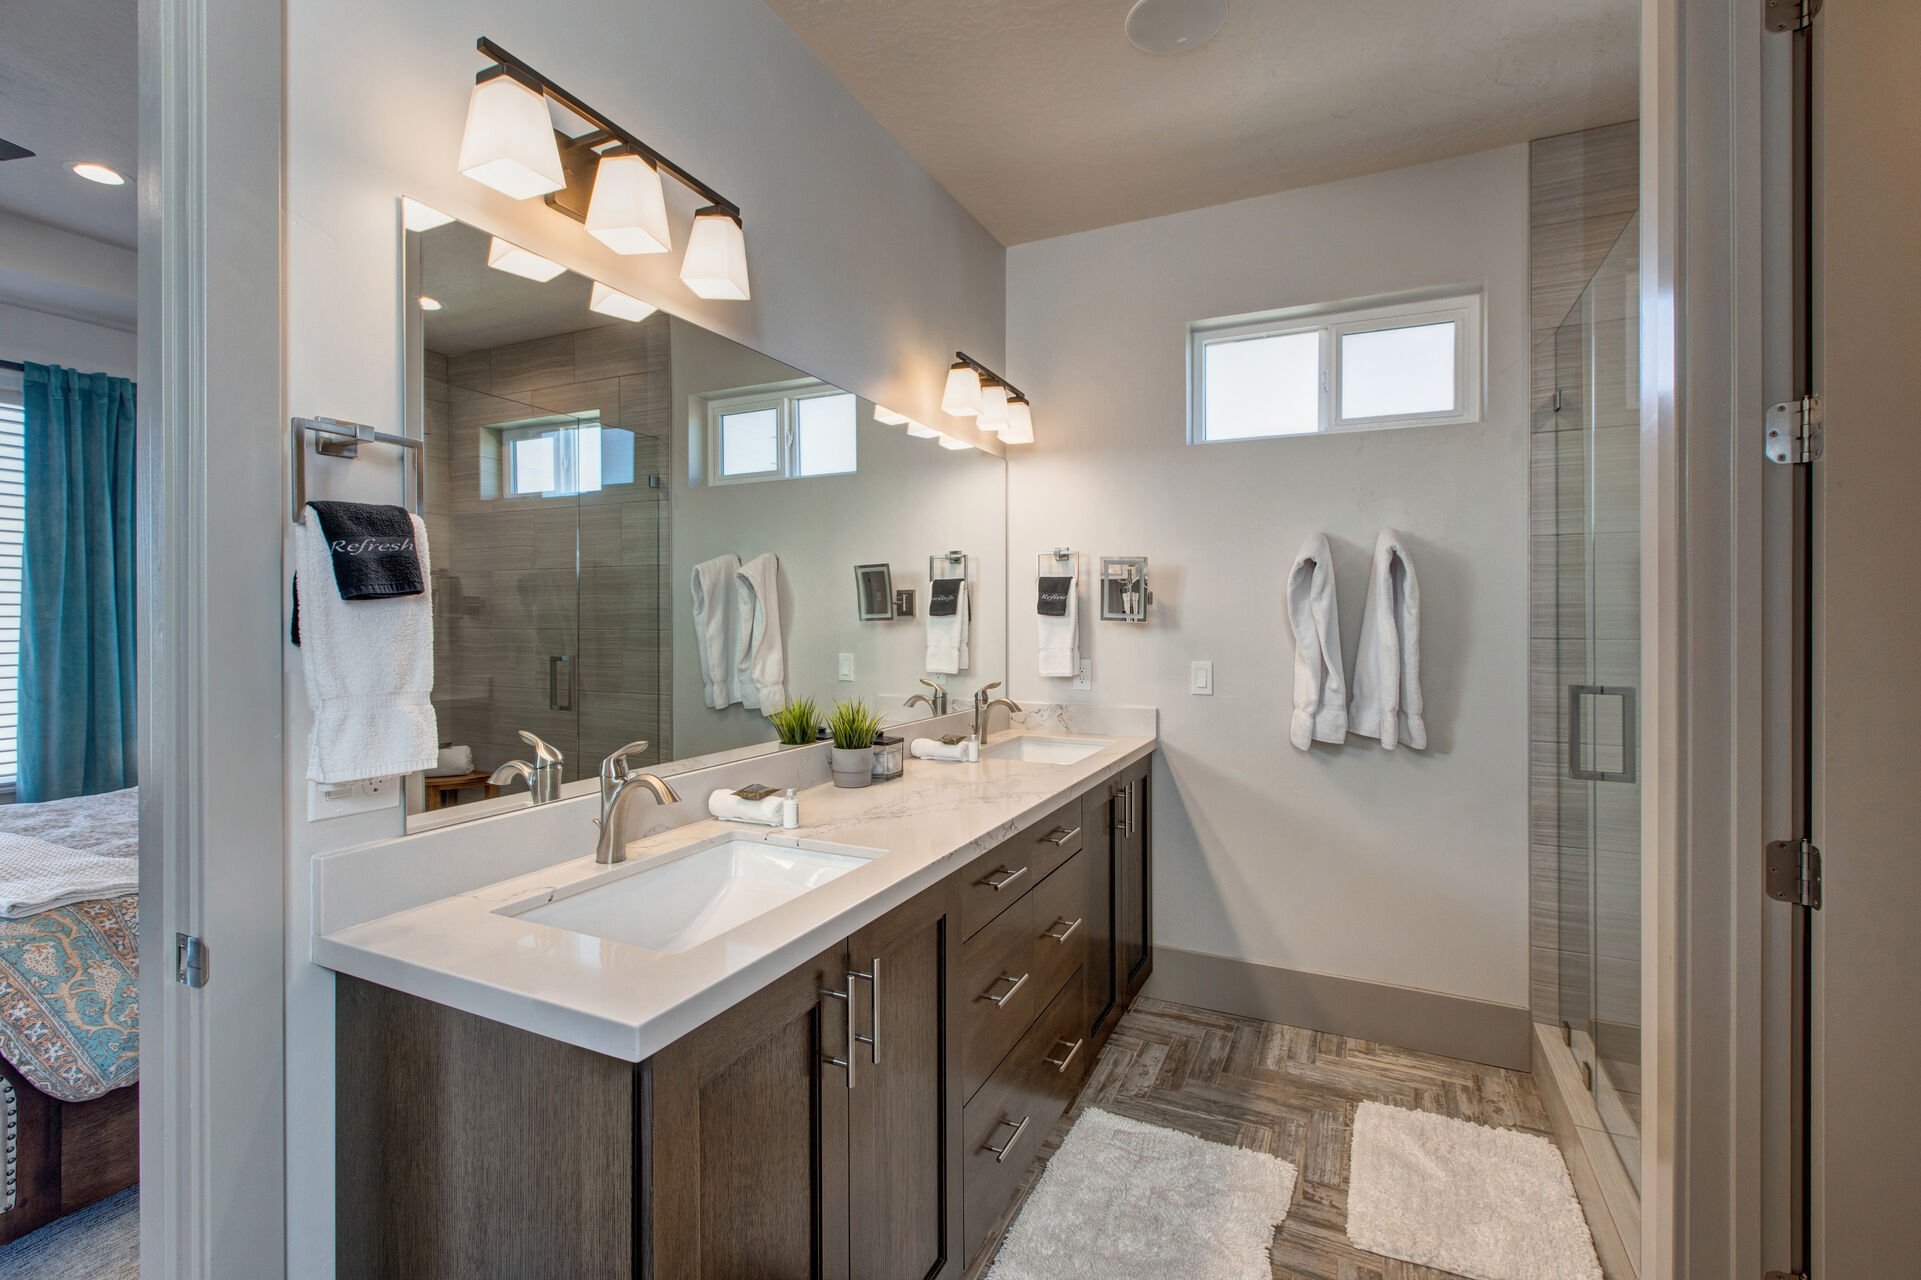 Master bathroom with double sinks, tub, shower, walk-in closet, and separate washroom